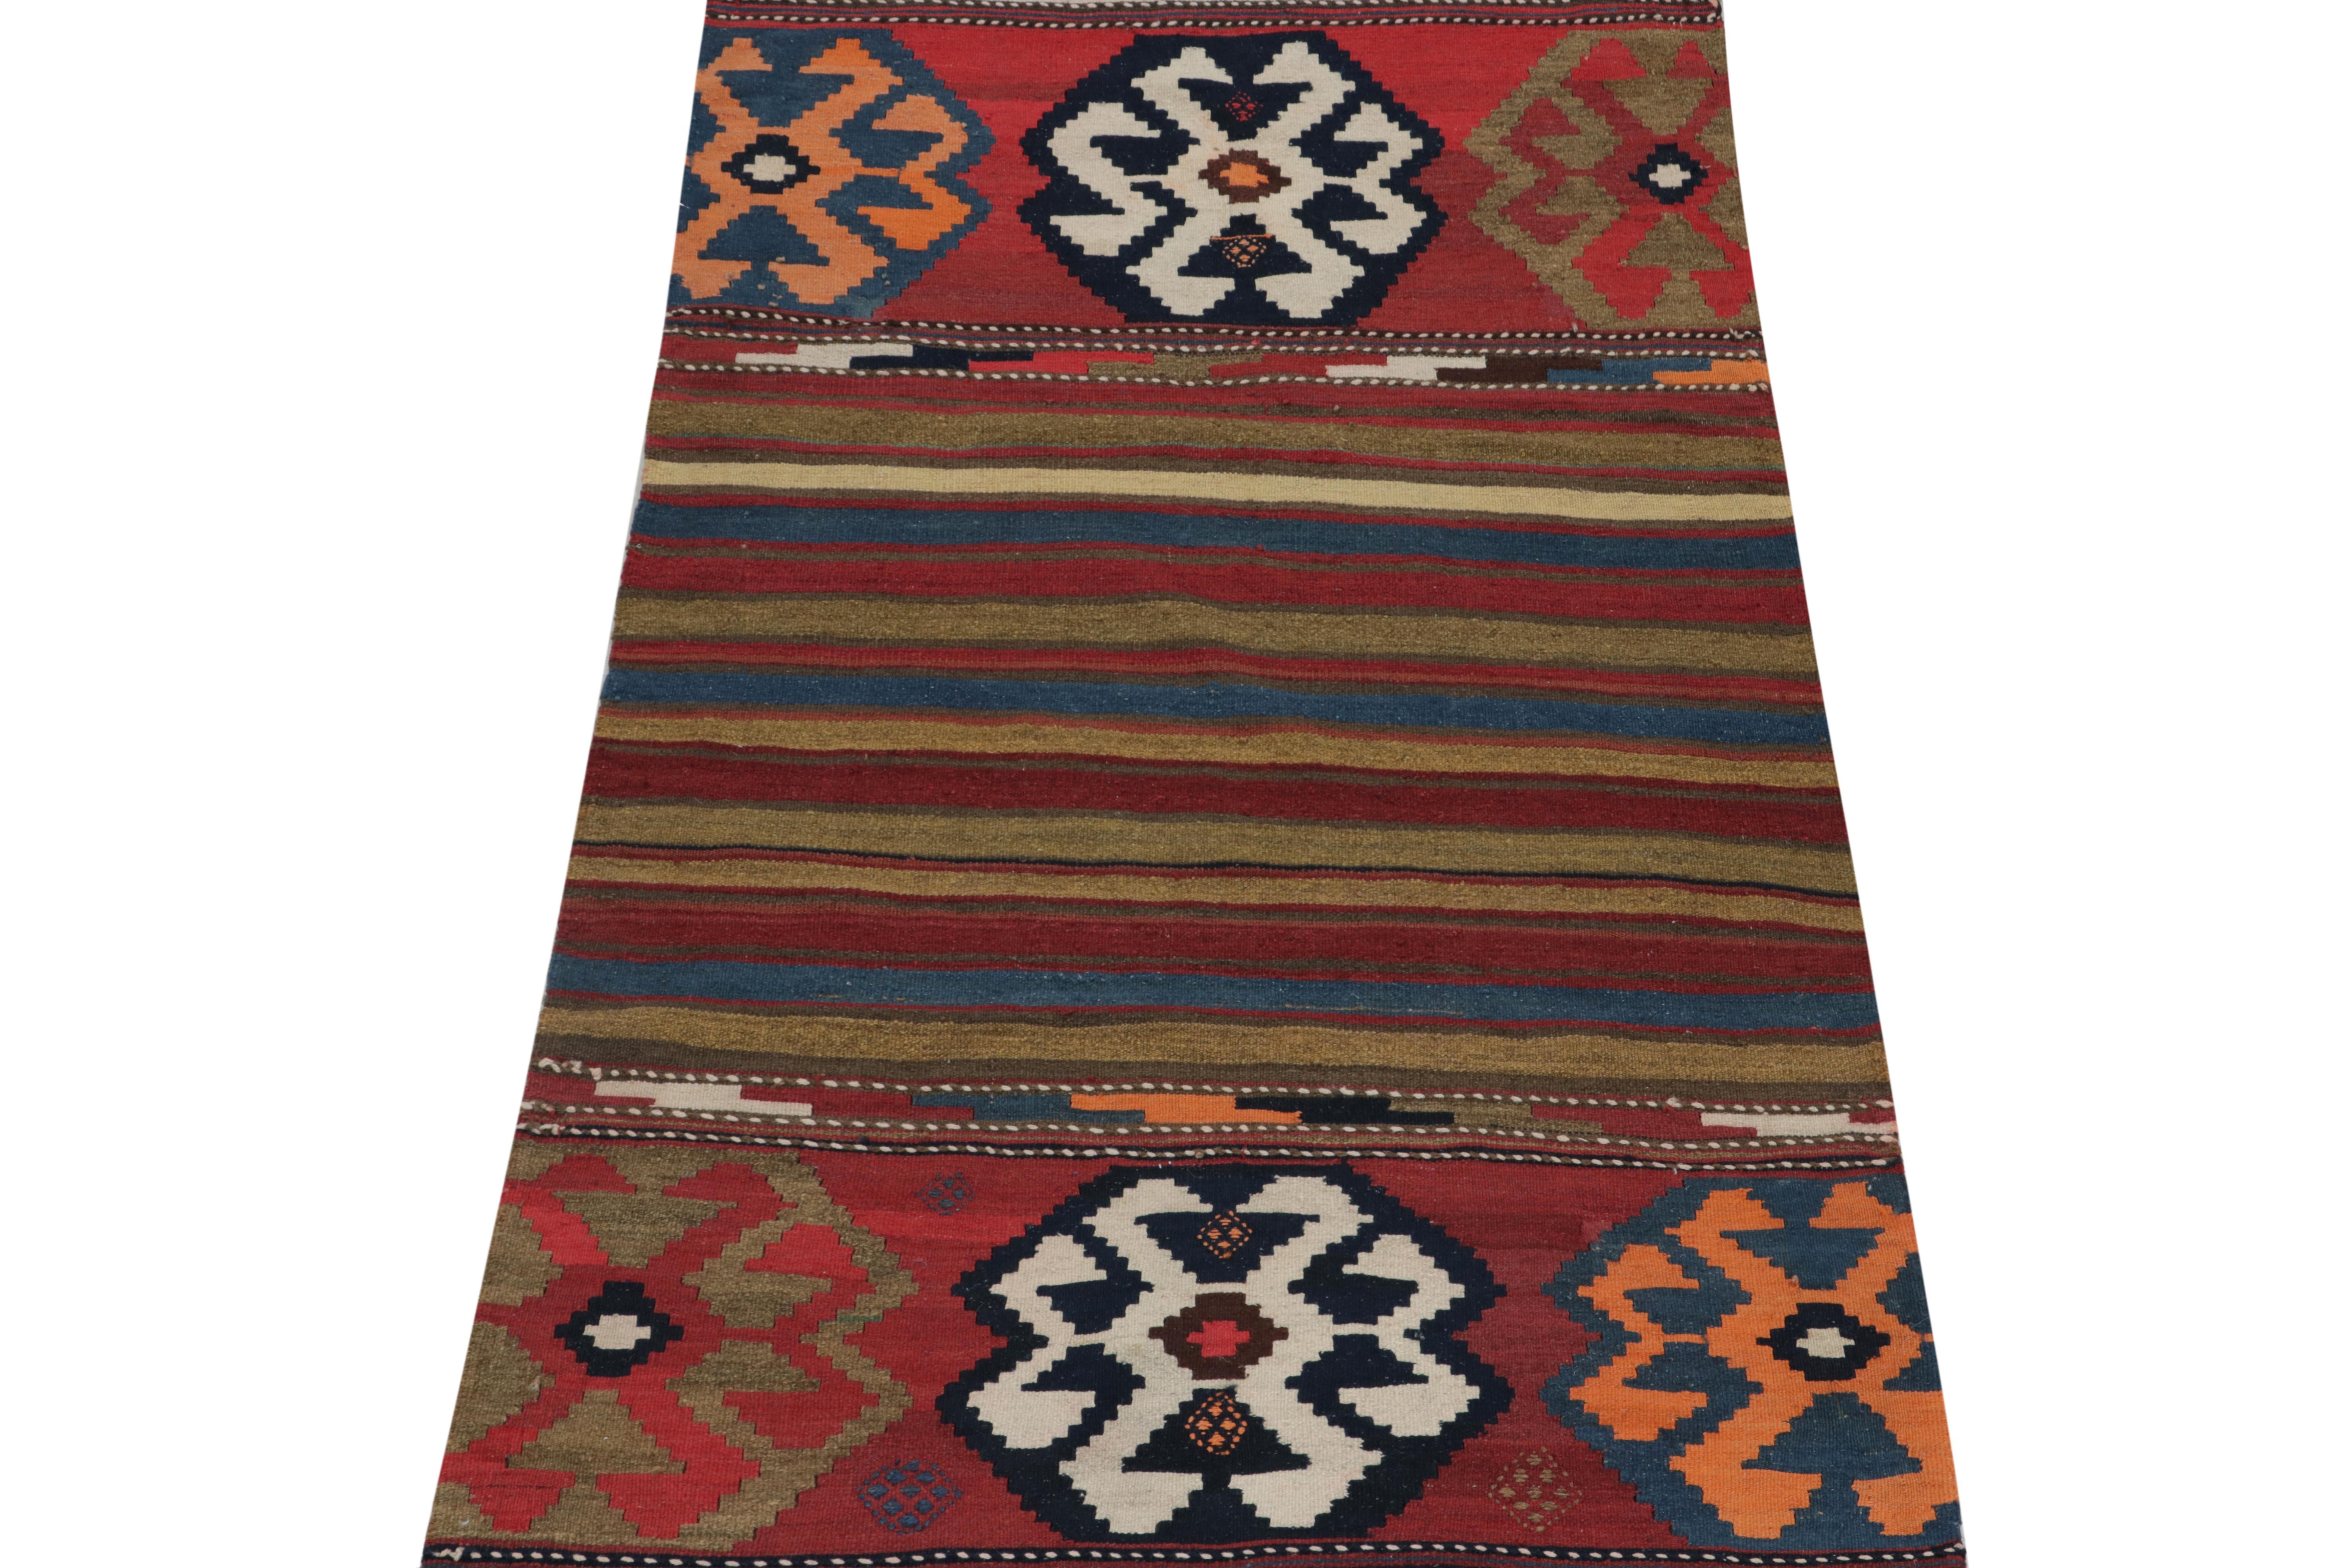 This vintage 3x6 Persian kilim is a unique tribal runner for its period, handwoven in wool circa 1950-1960.

Further on the Design:

A field hosts tribal patterns & a series of horizontal stripes in polychromatic tones of red, white, black,